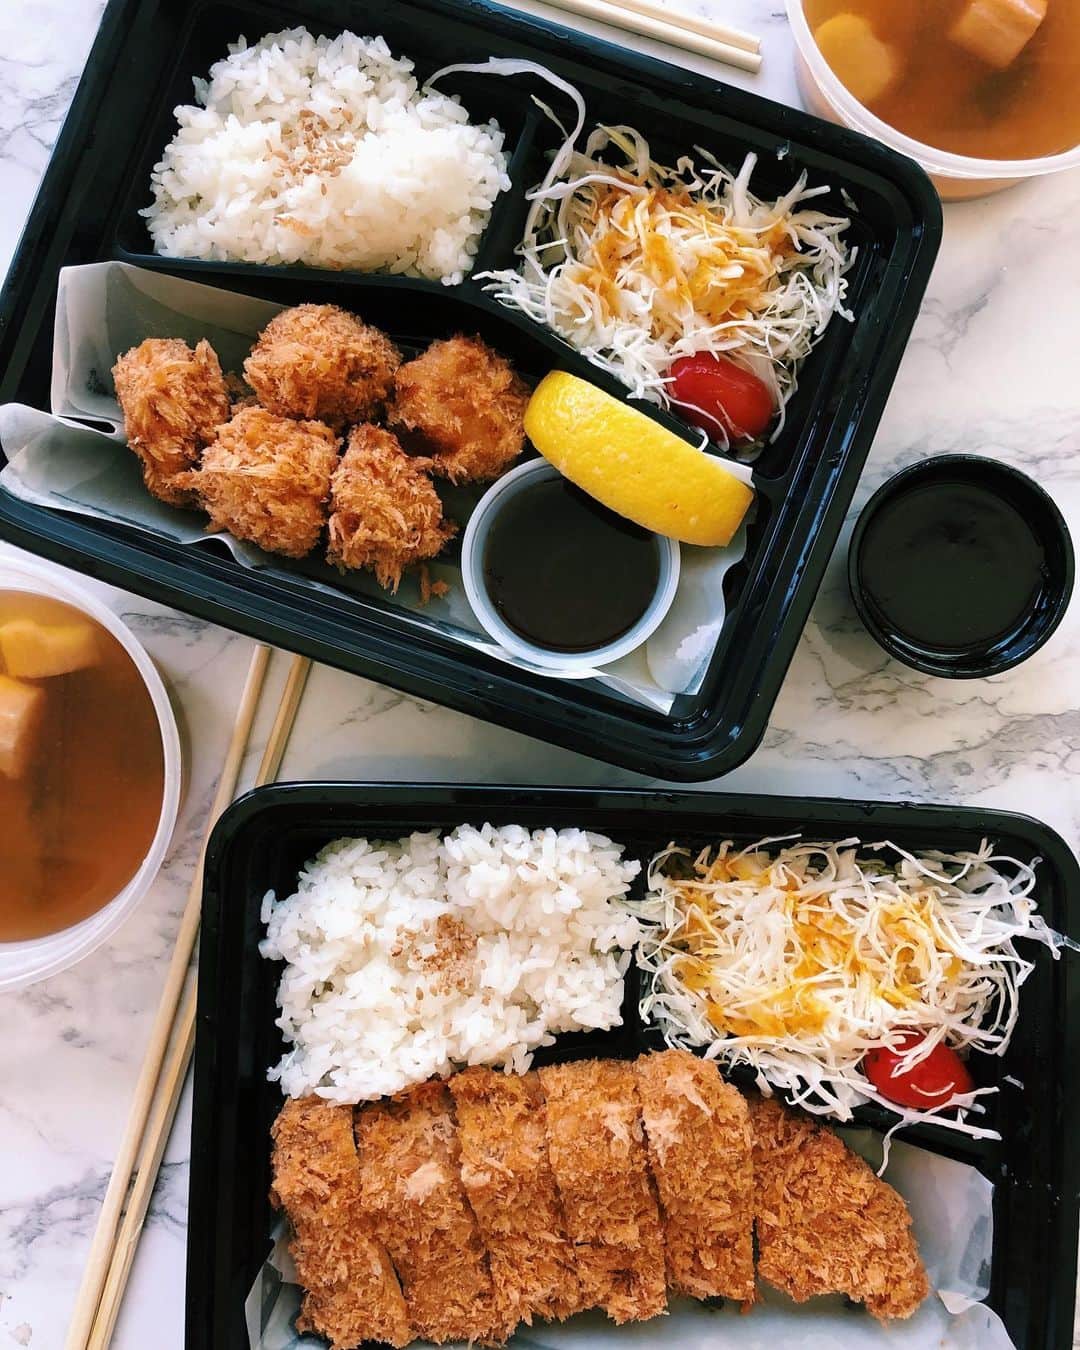 Antonietteのインスタグラム：「Well that was one of the most super oishii (おいしい) 😋 quarantine lunches I’ve had thus far! If you can’t travel to 🇯🇵 might as well treat yourself to some Osaka style tonkatsu in San Diego!  We ordered the fillet pork loin katsu and the Hokkaido scallops meals that came with cabbage salad, miso soup and rice. The breading is light, crispy and crunchy with such quality and care into their preparation. Come by and support this local business! #supportlocal」